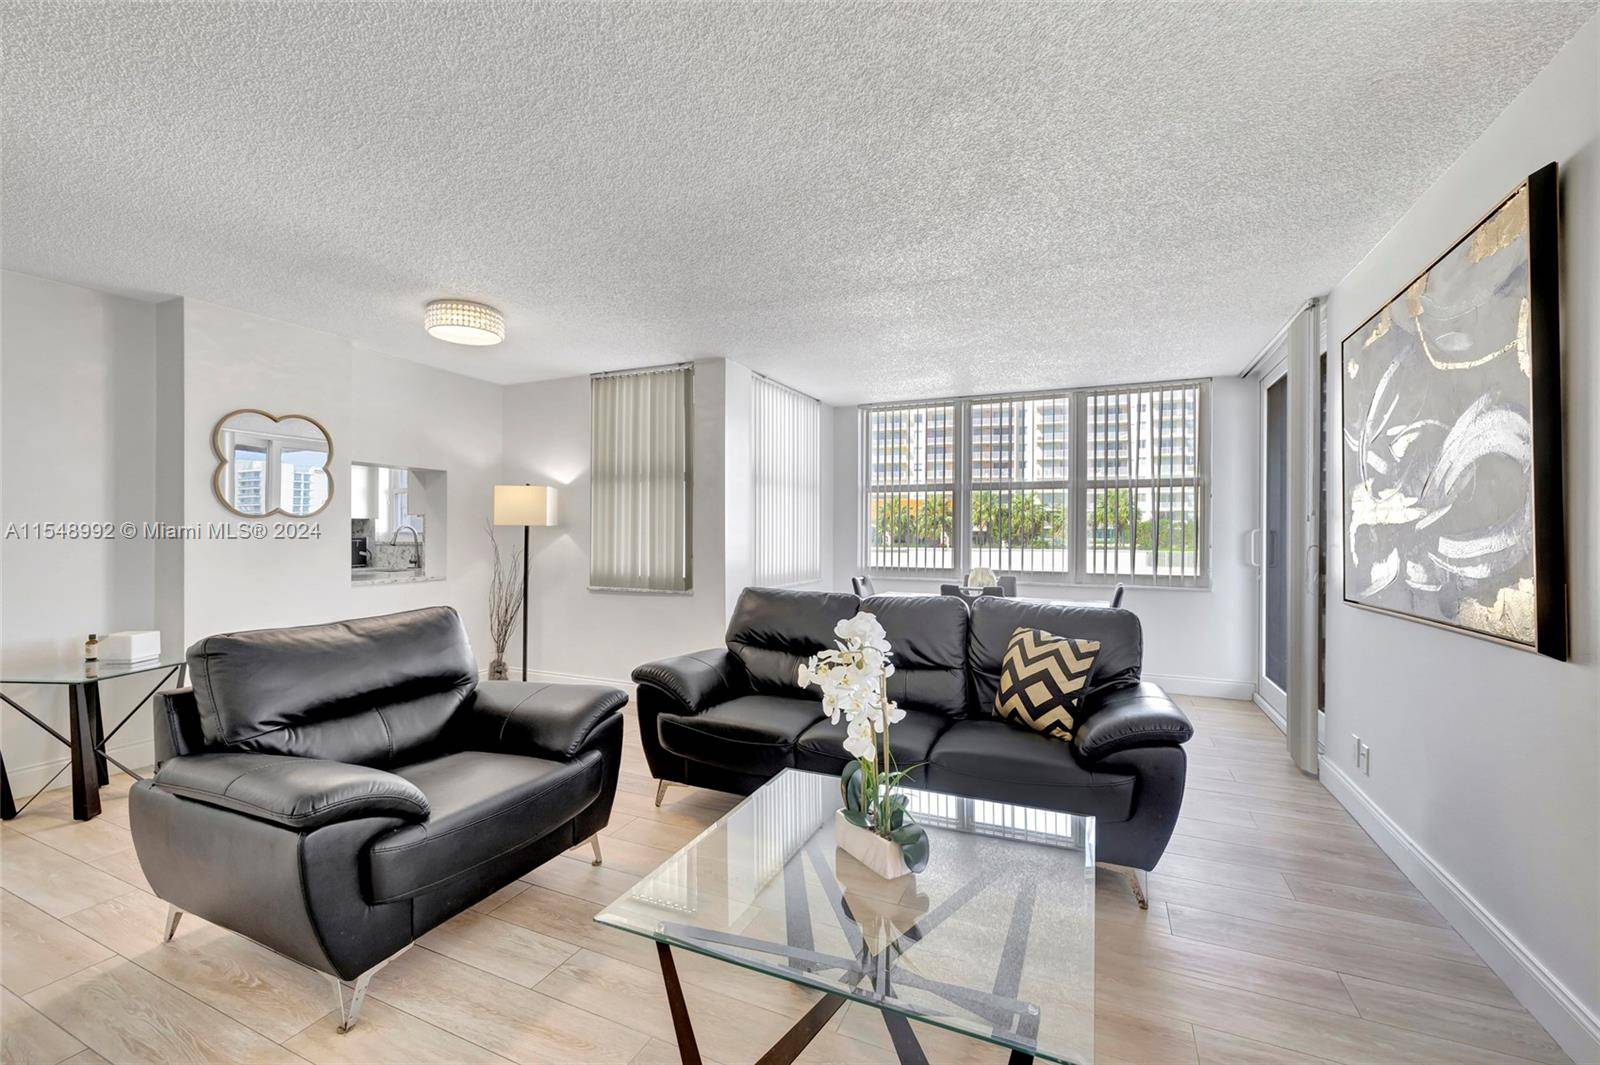 Excellent Price This spacious corner unit is situated in the heart of Fort Lauderdale, just across the street from the beach.